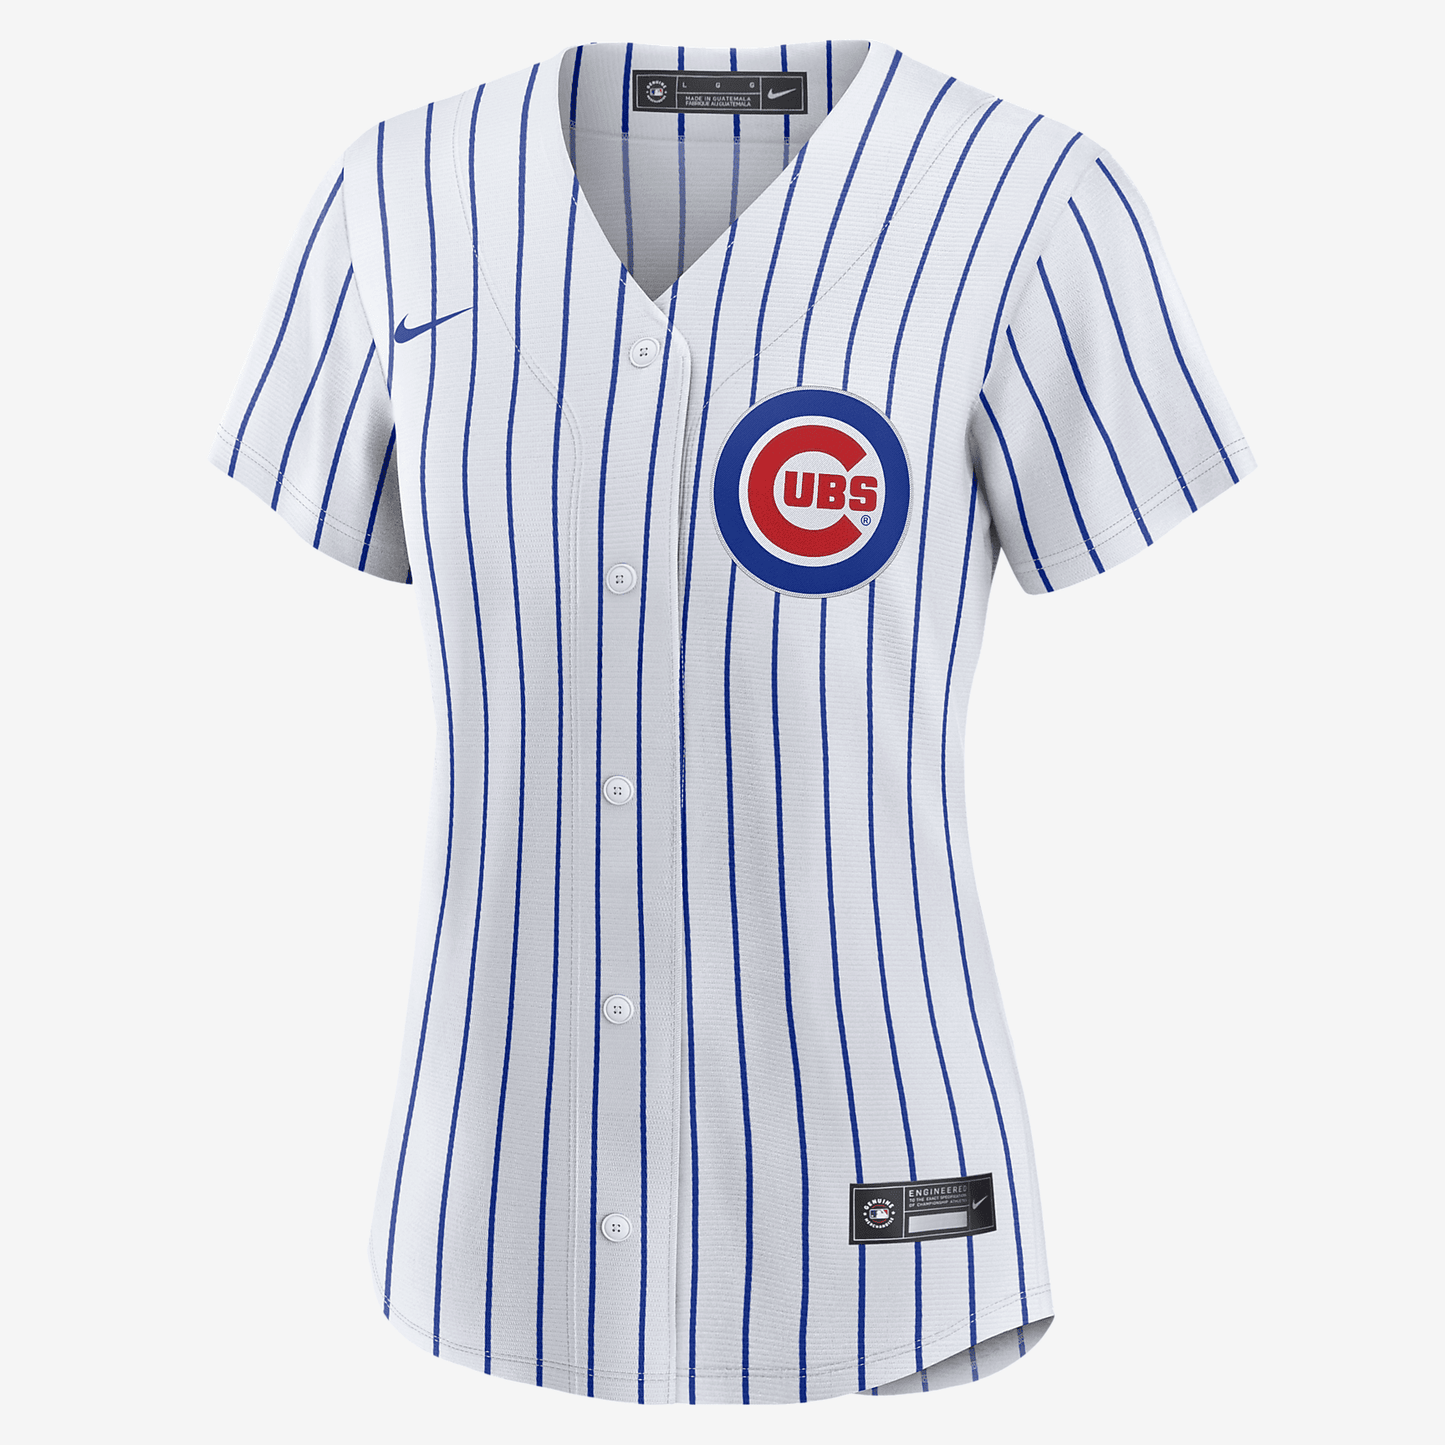 MLB Chicago Cubs (Dansby Swanson) Women's Replica Baseball Jersey - White/Royal Blue